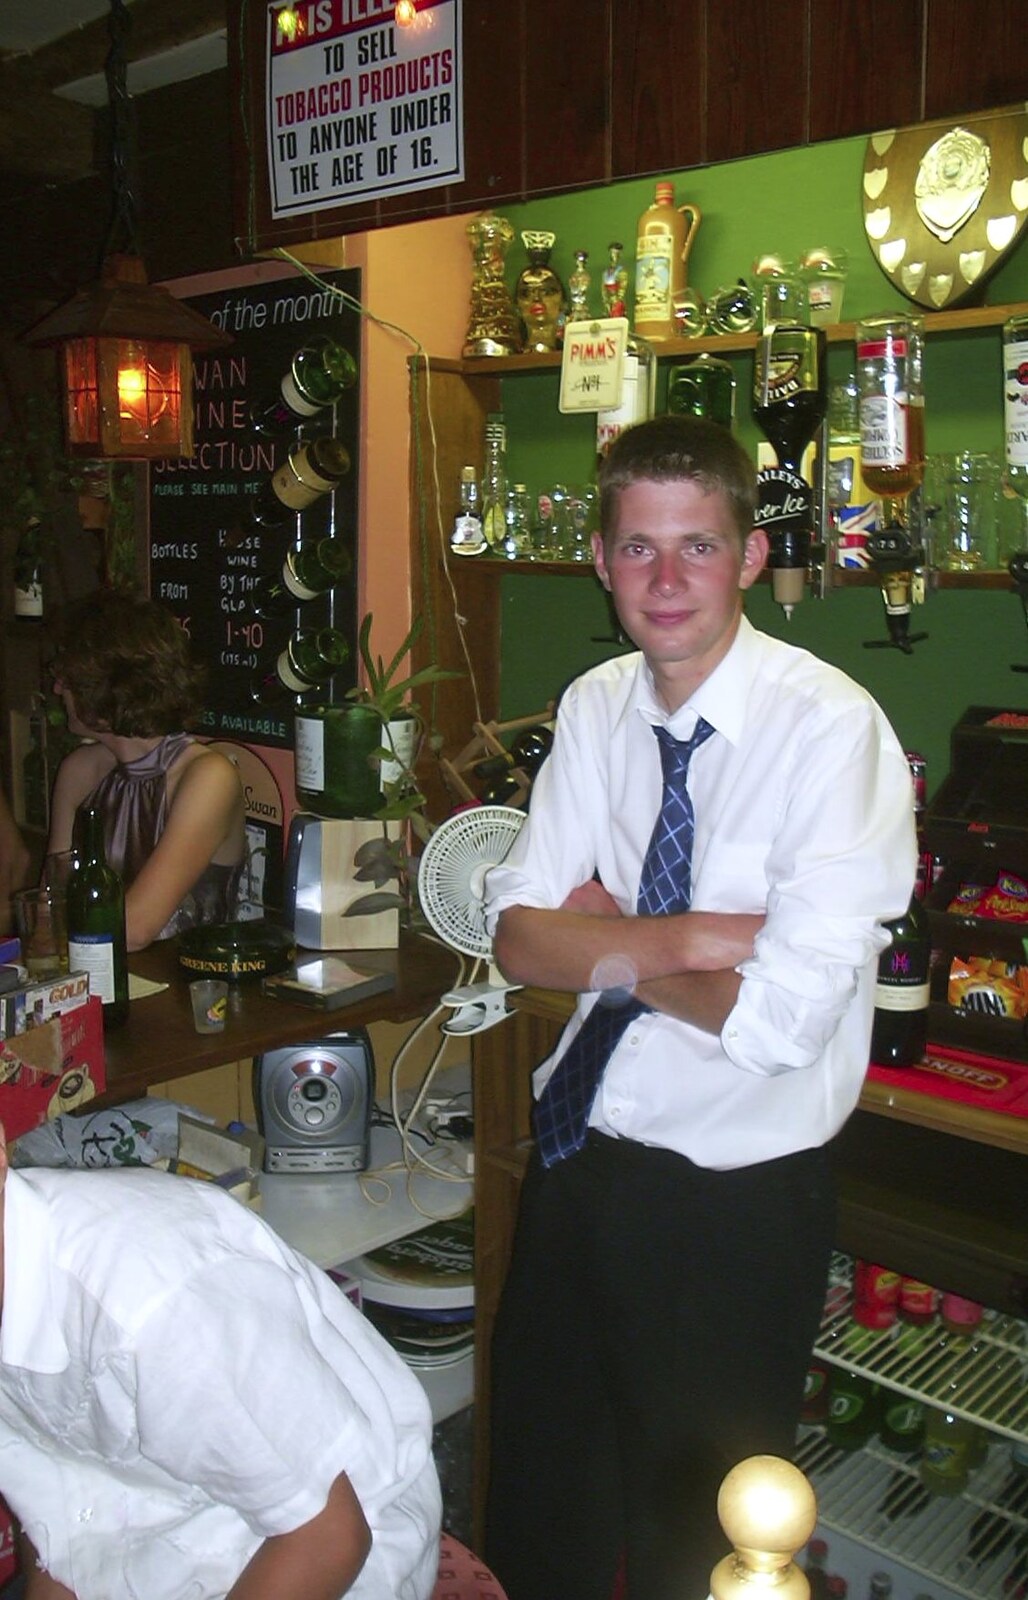 The Boy Phil's behind the bar from Claire and Paul's Wedding and The BBs, Thrandeston and Brome, Suffolk - 4th September 2004